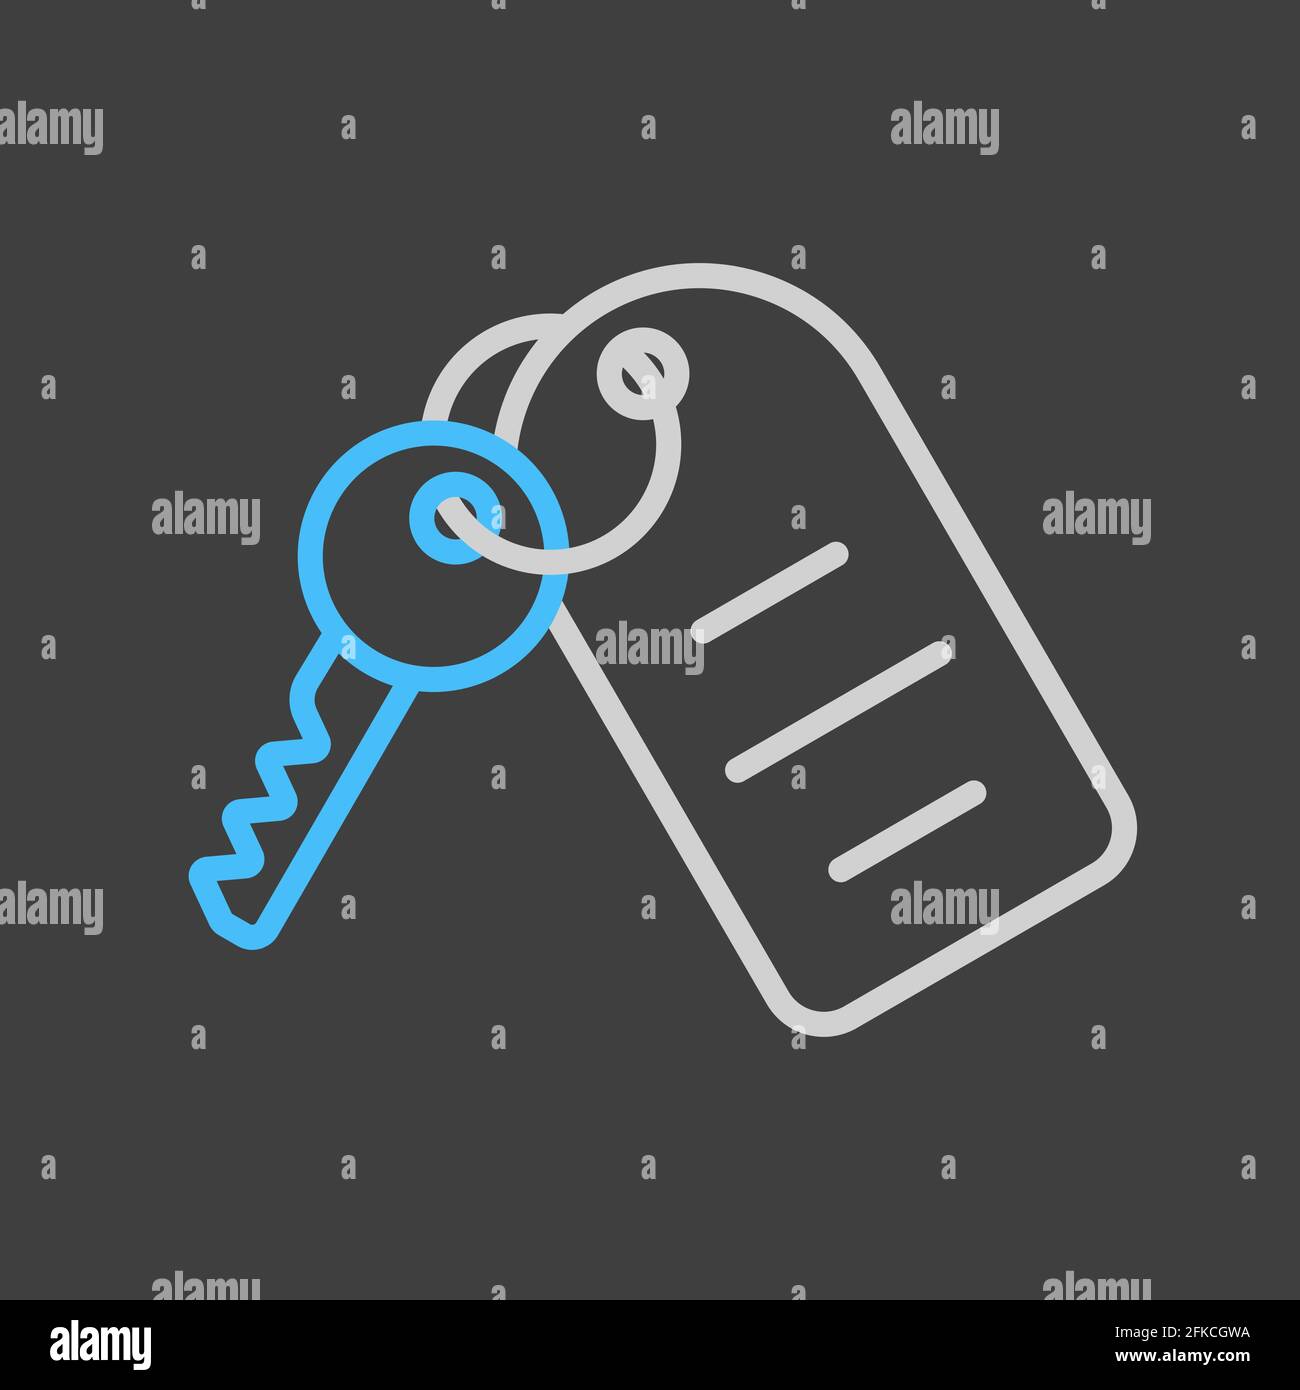 Hotel room key with number vector icon on dark background. Graph symbol for travel and tourism web site and apps design, logo, app, UI Stock Vector